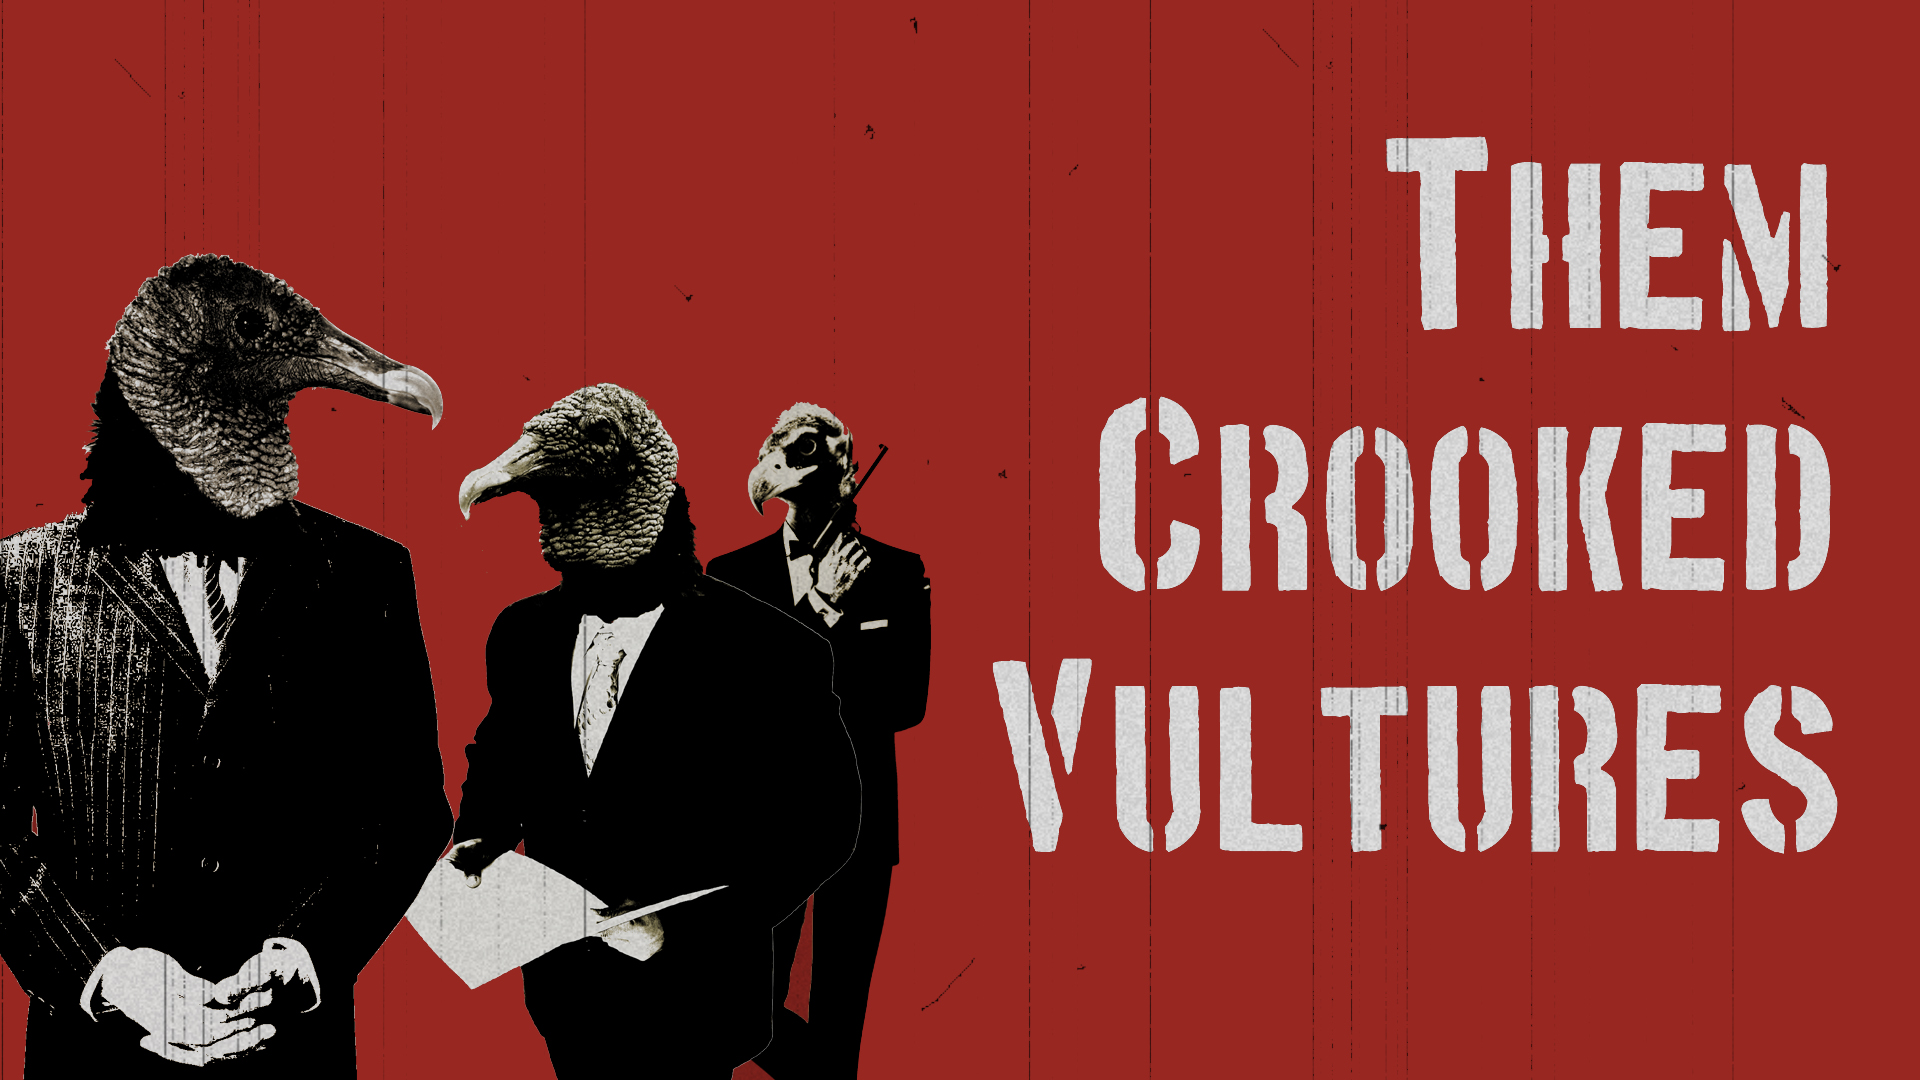 Them_Crooked_Vultures_v1_by_autoriot.jpg